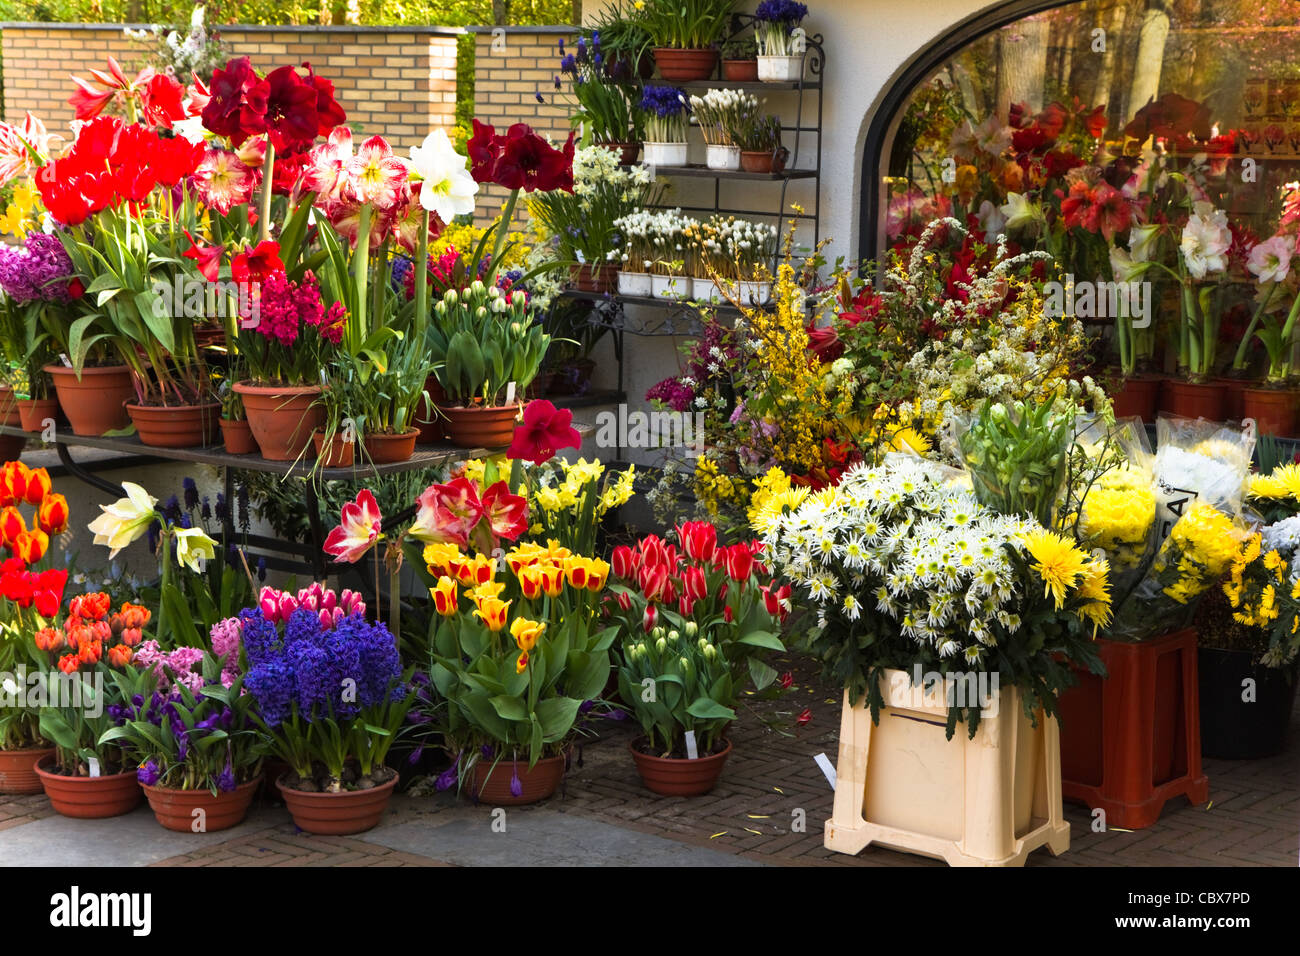 Decorative collection of colorful spring flowers outside a florist shop Stock Photo